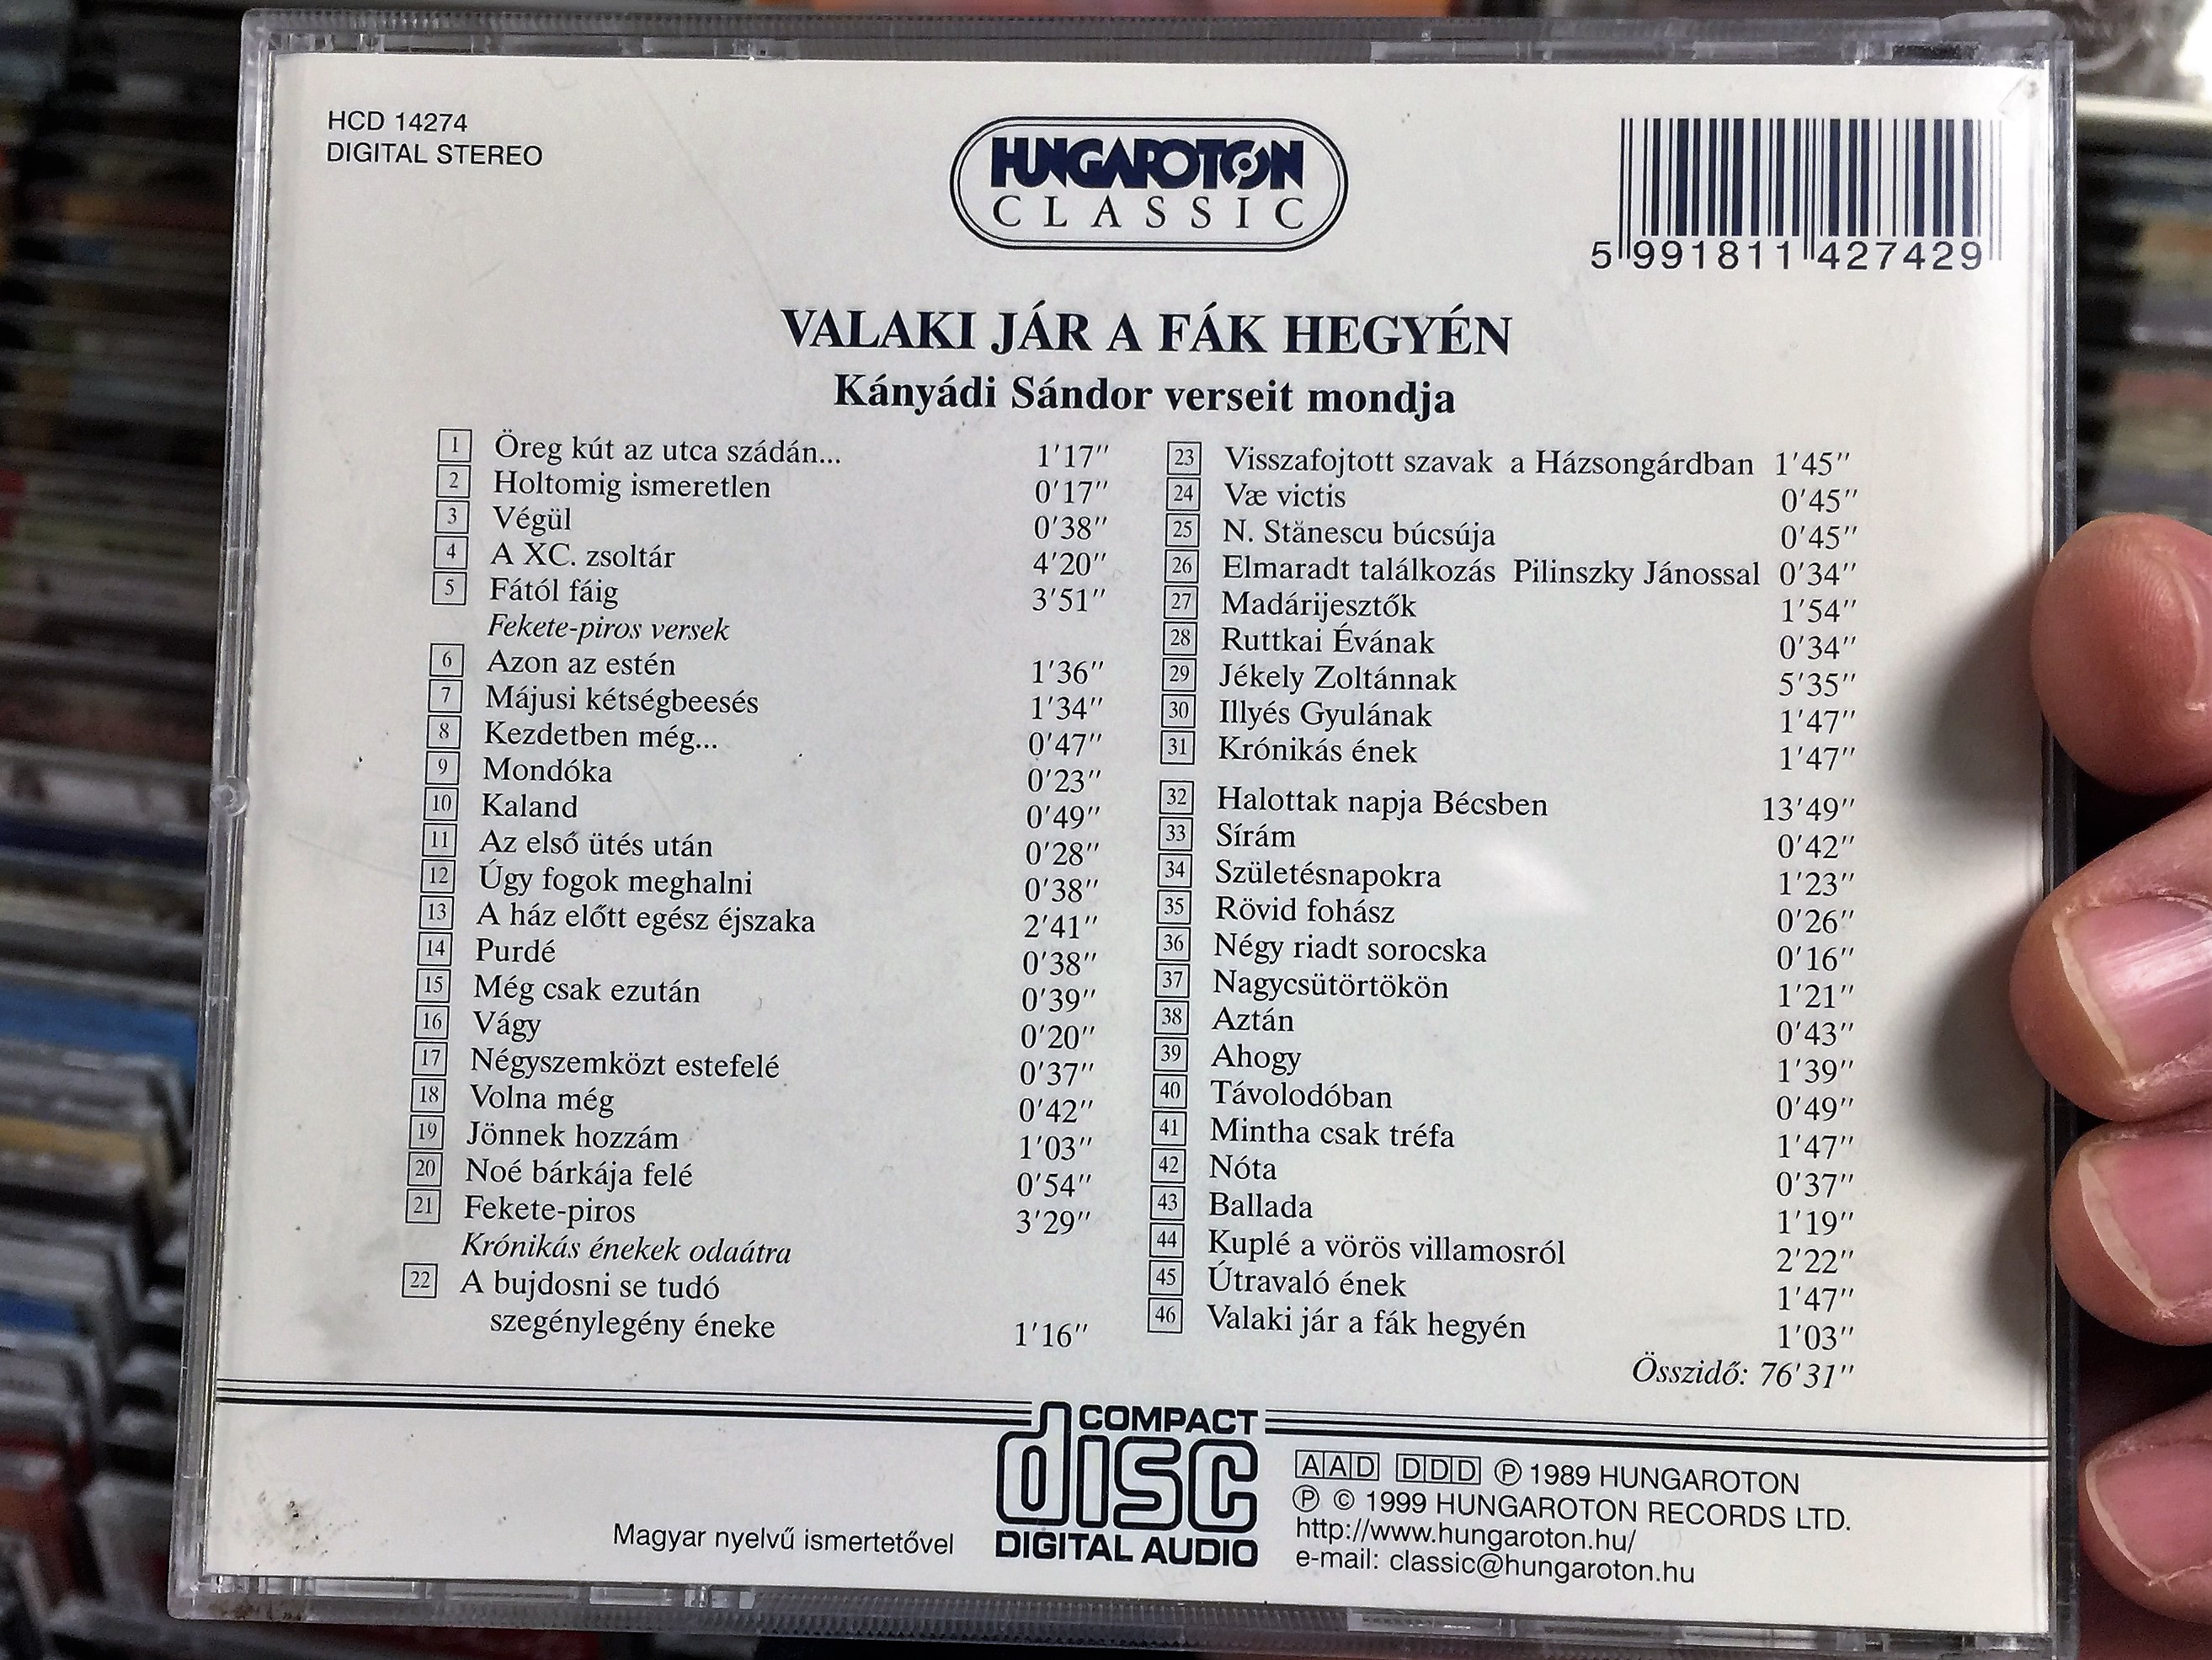 valaki-j-r-a-f-k-hegy-n-k-ny-di-s-ndor-verseit-mondja-hungarian-cd-1999-somebody-on-the-mount-of-trees-poet-s-ndor-k-ny-di-recites-his-poems-hungaroton-hcd-14274-2-.jpg